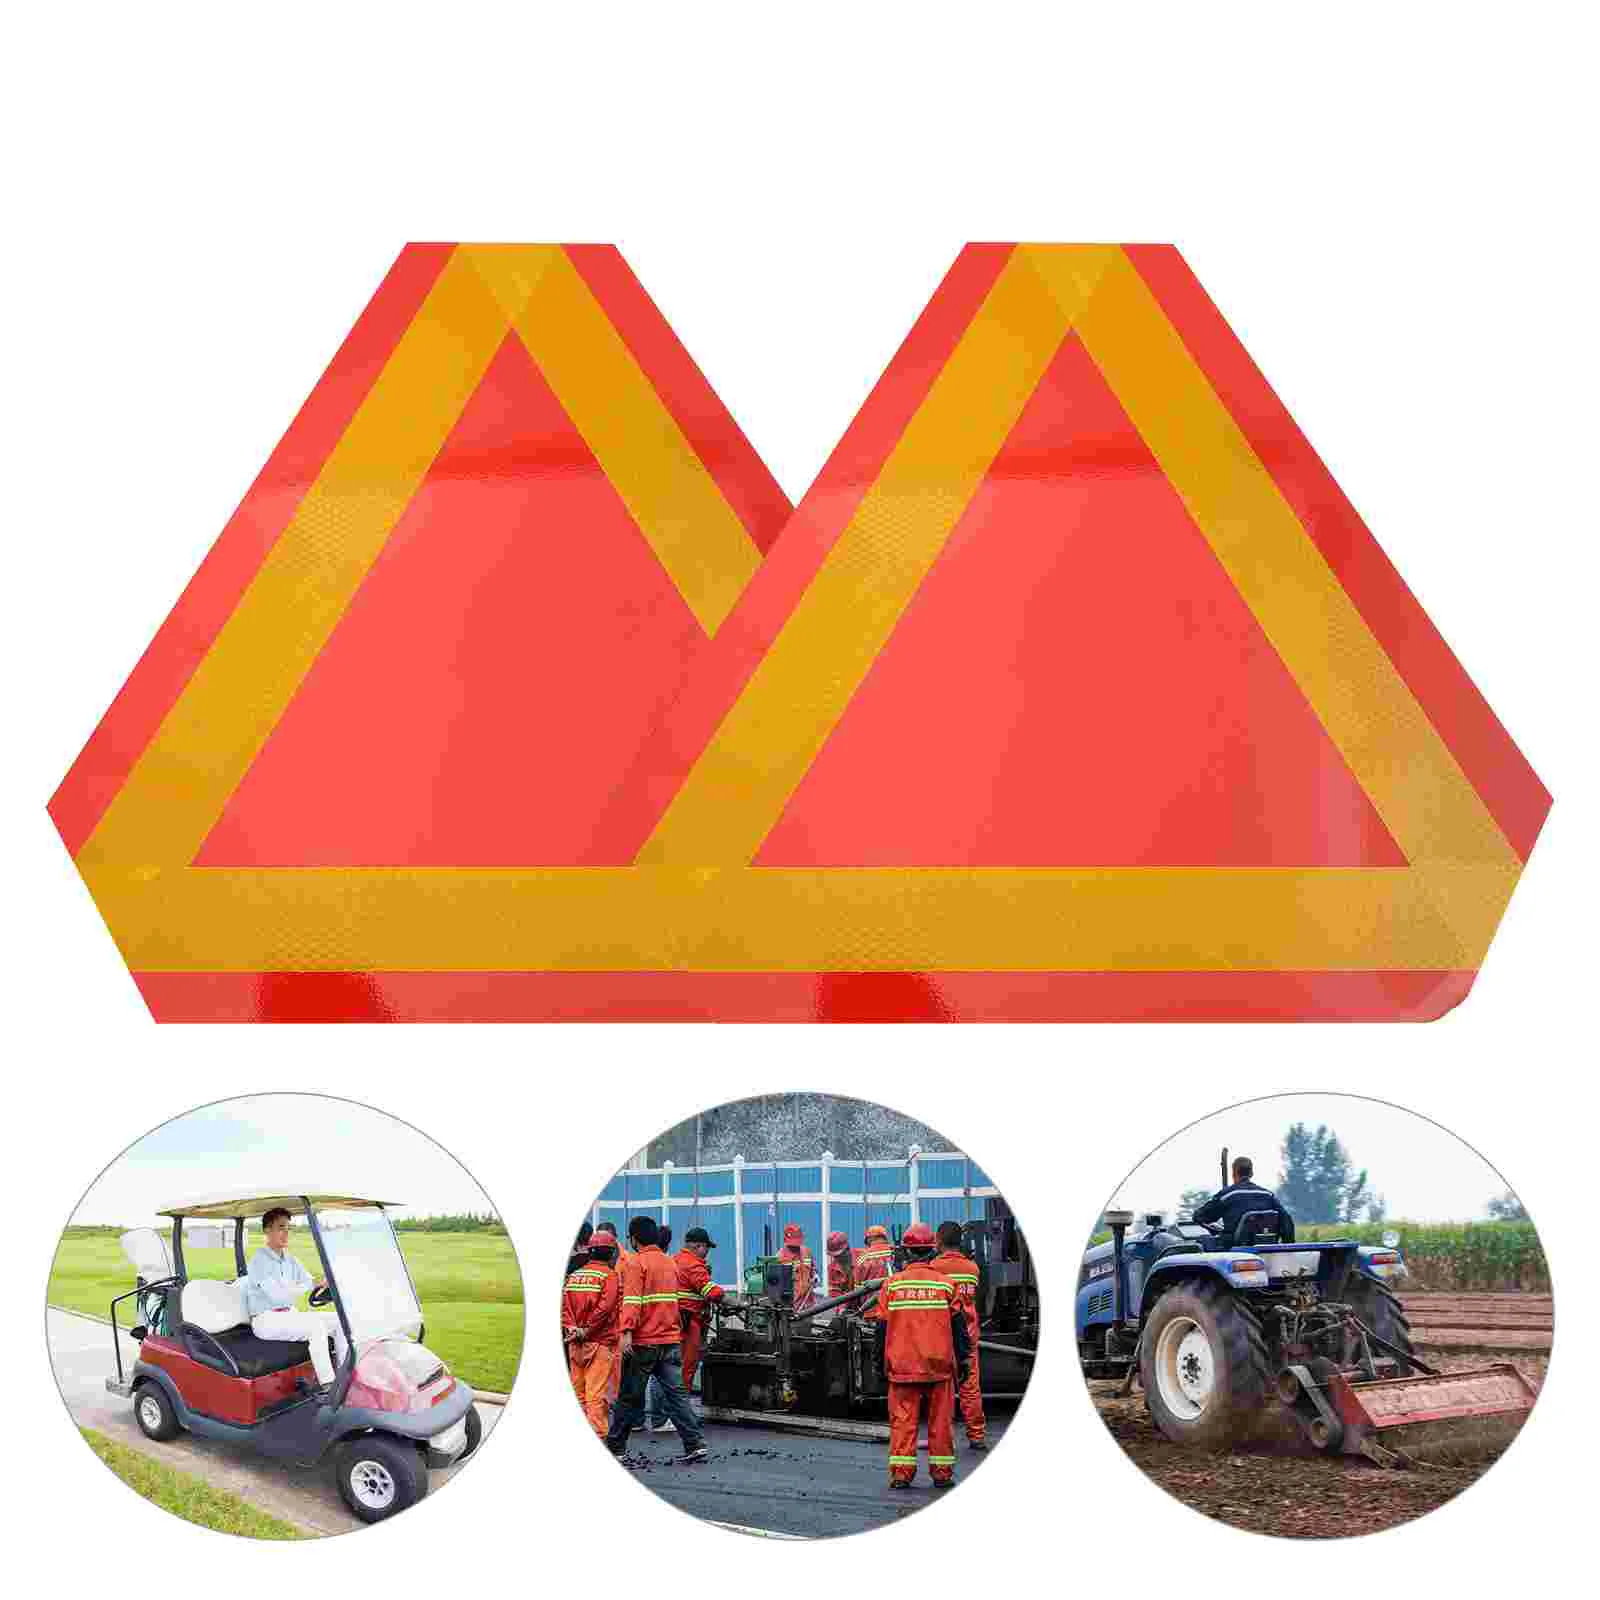 

2 Pcs Triangular Reflector Vehicle Triangle Reflectors Car Safety Signs Accessory Flag Warning Slow Moving Aluminum Plate